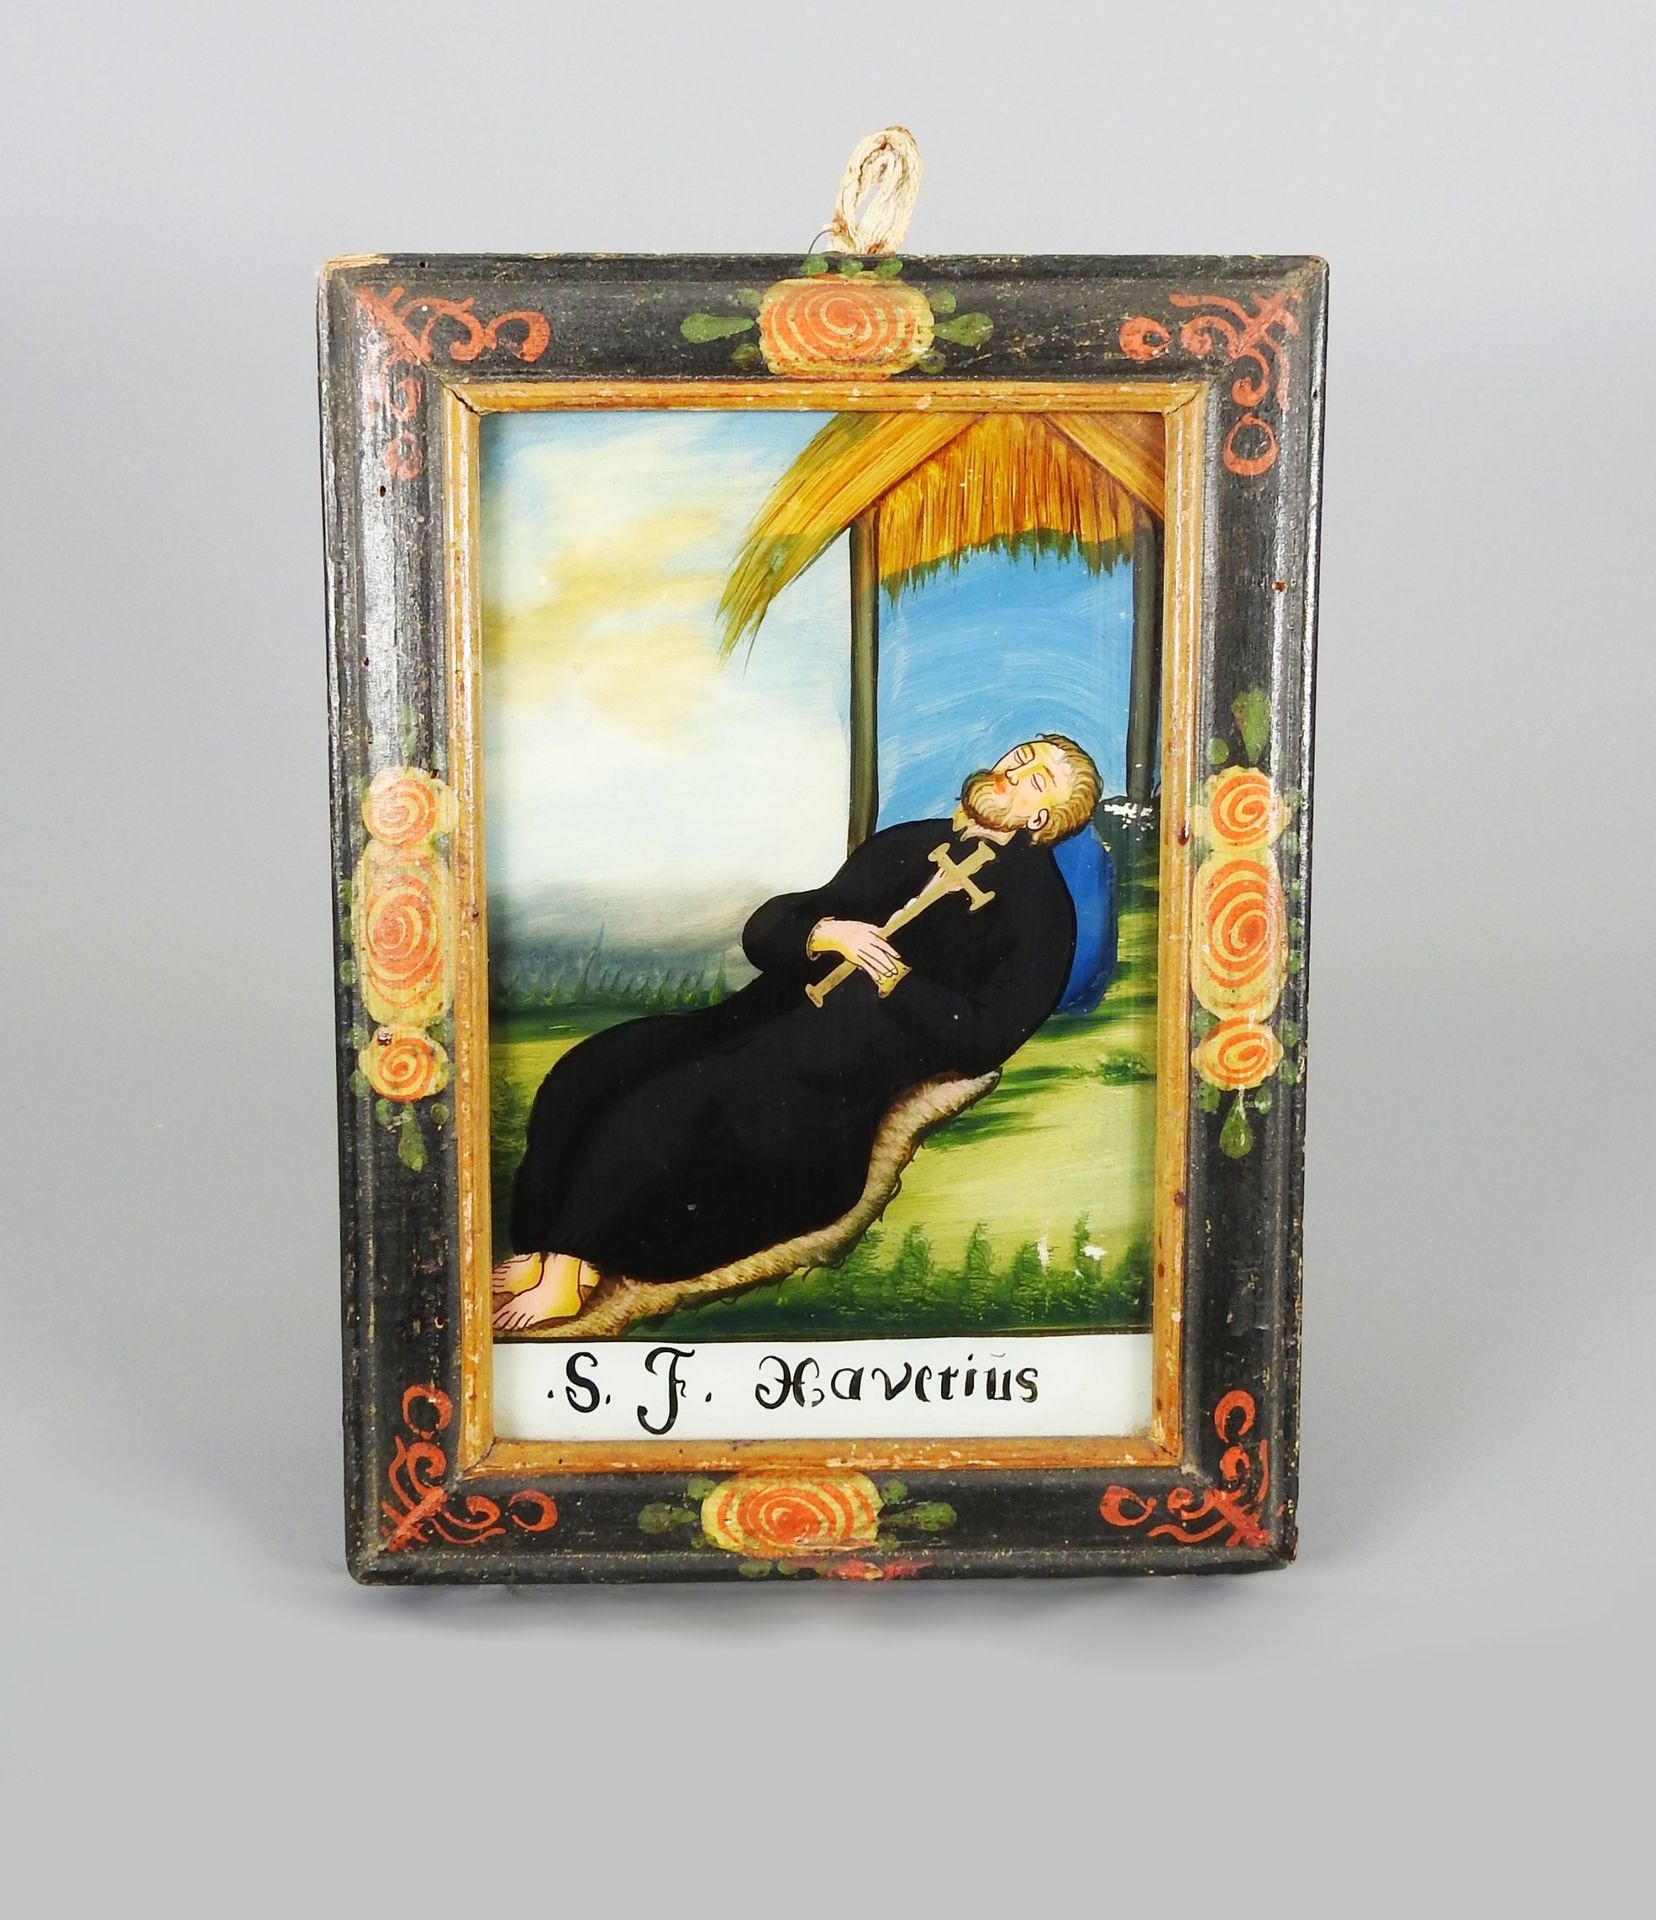 Heiliger Xaverius Painting on reverse glass. St. Xaverius lies with the cross on&hellip;